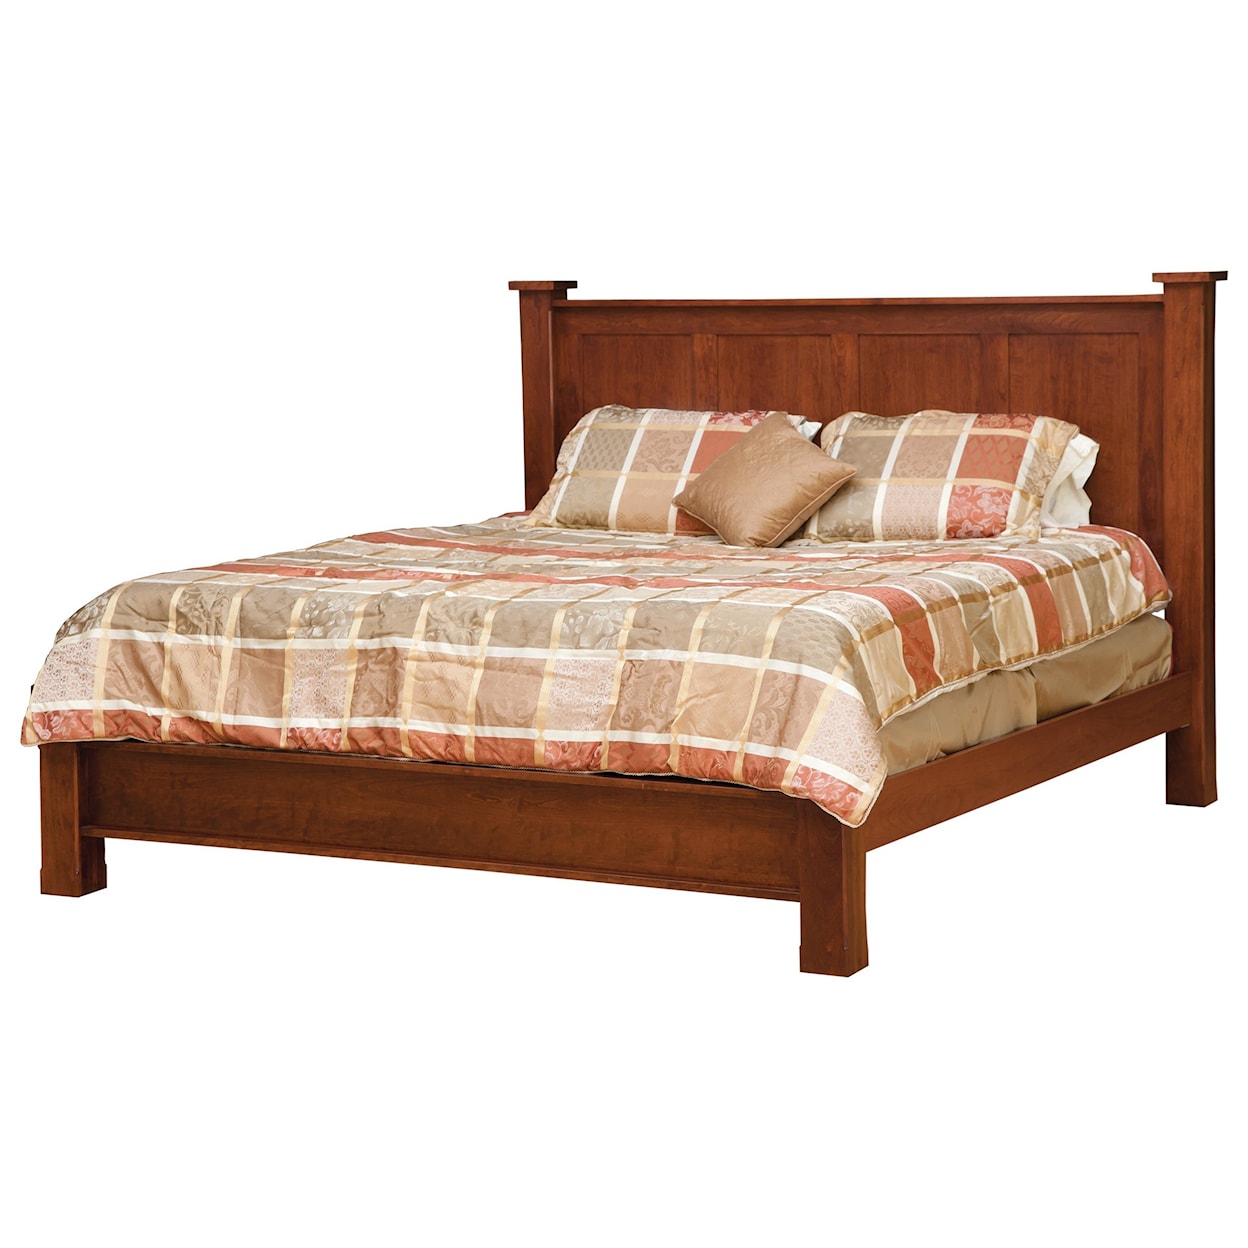 Daniel's Amish Treasure Twin Bed with Low Footboard